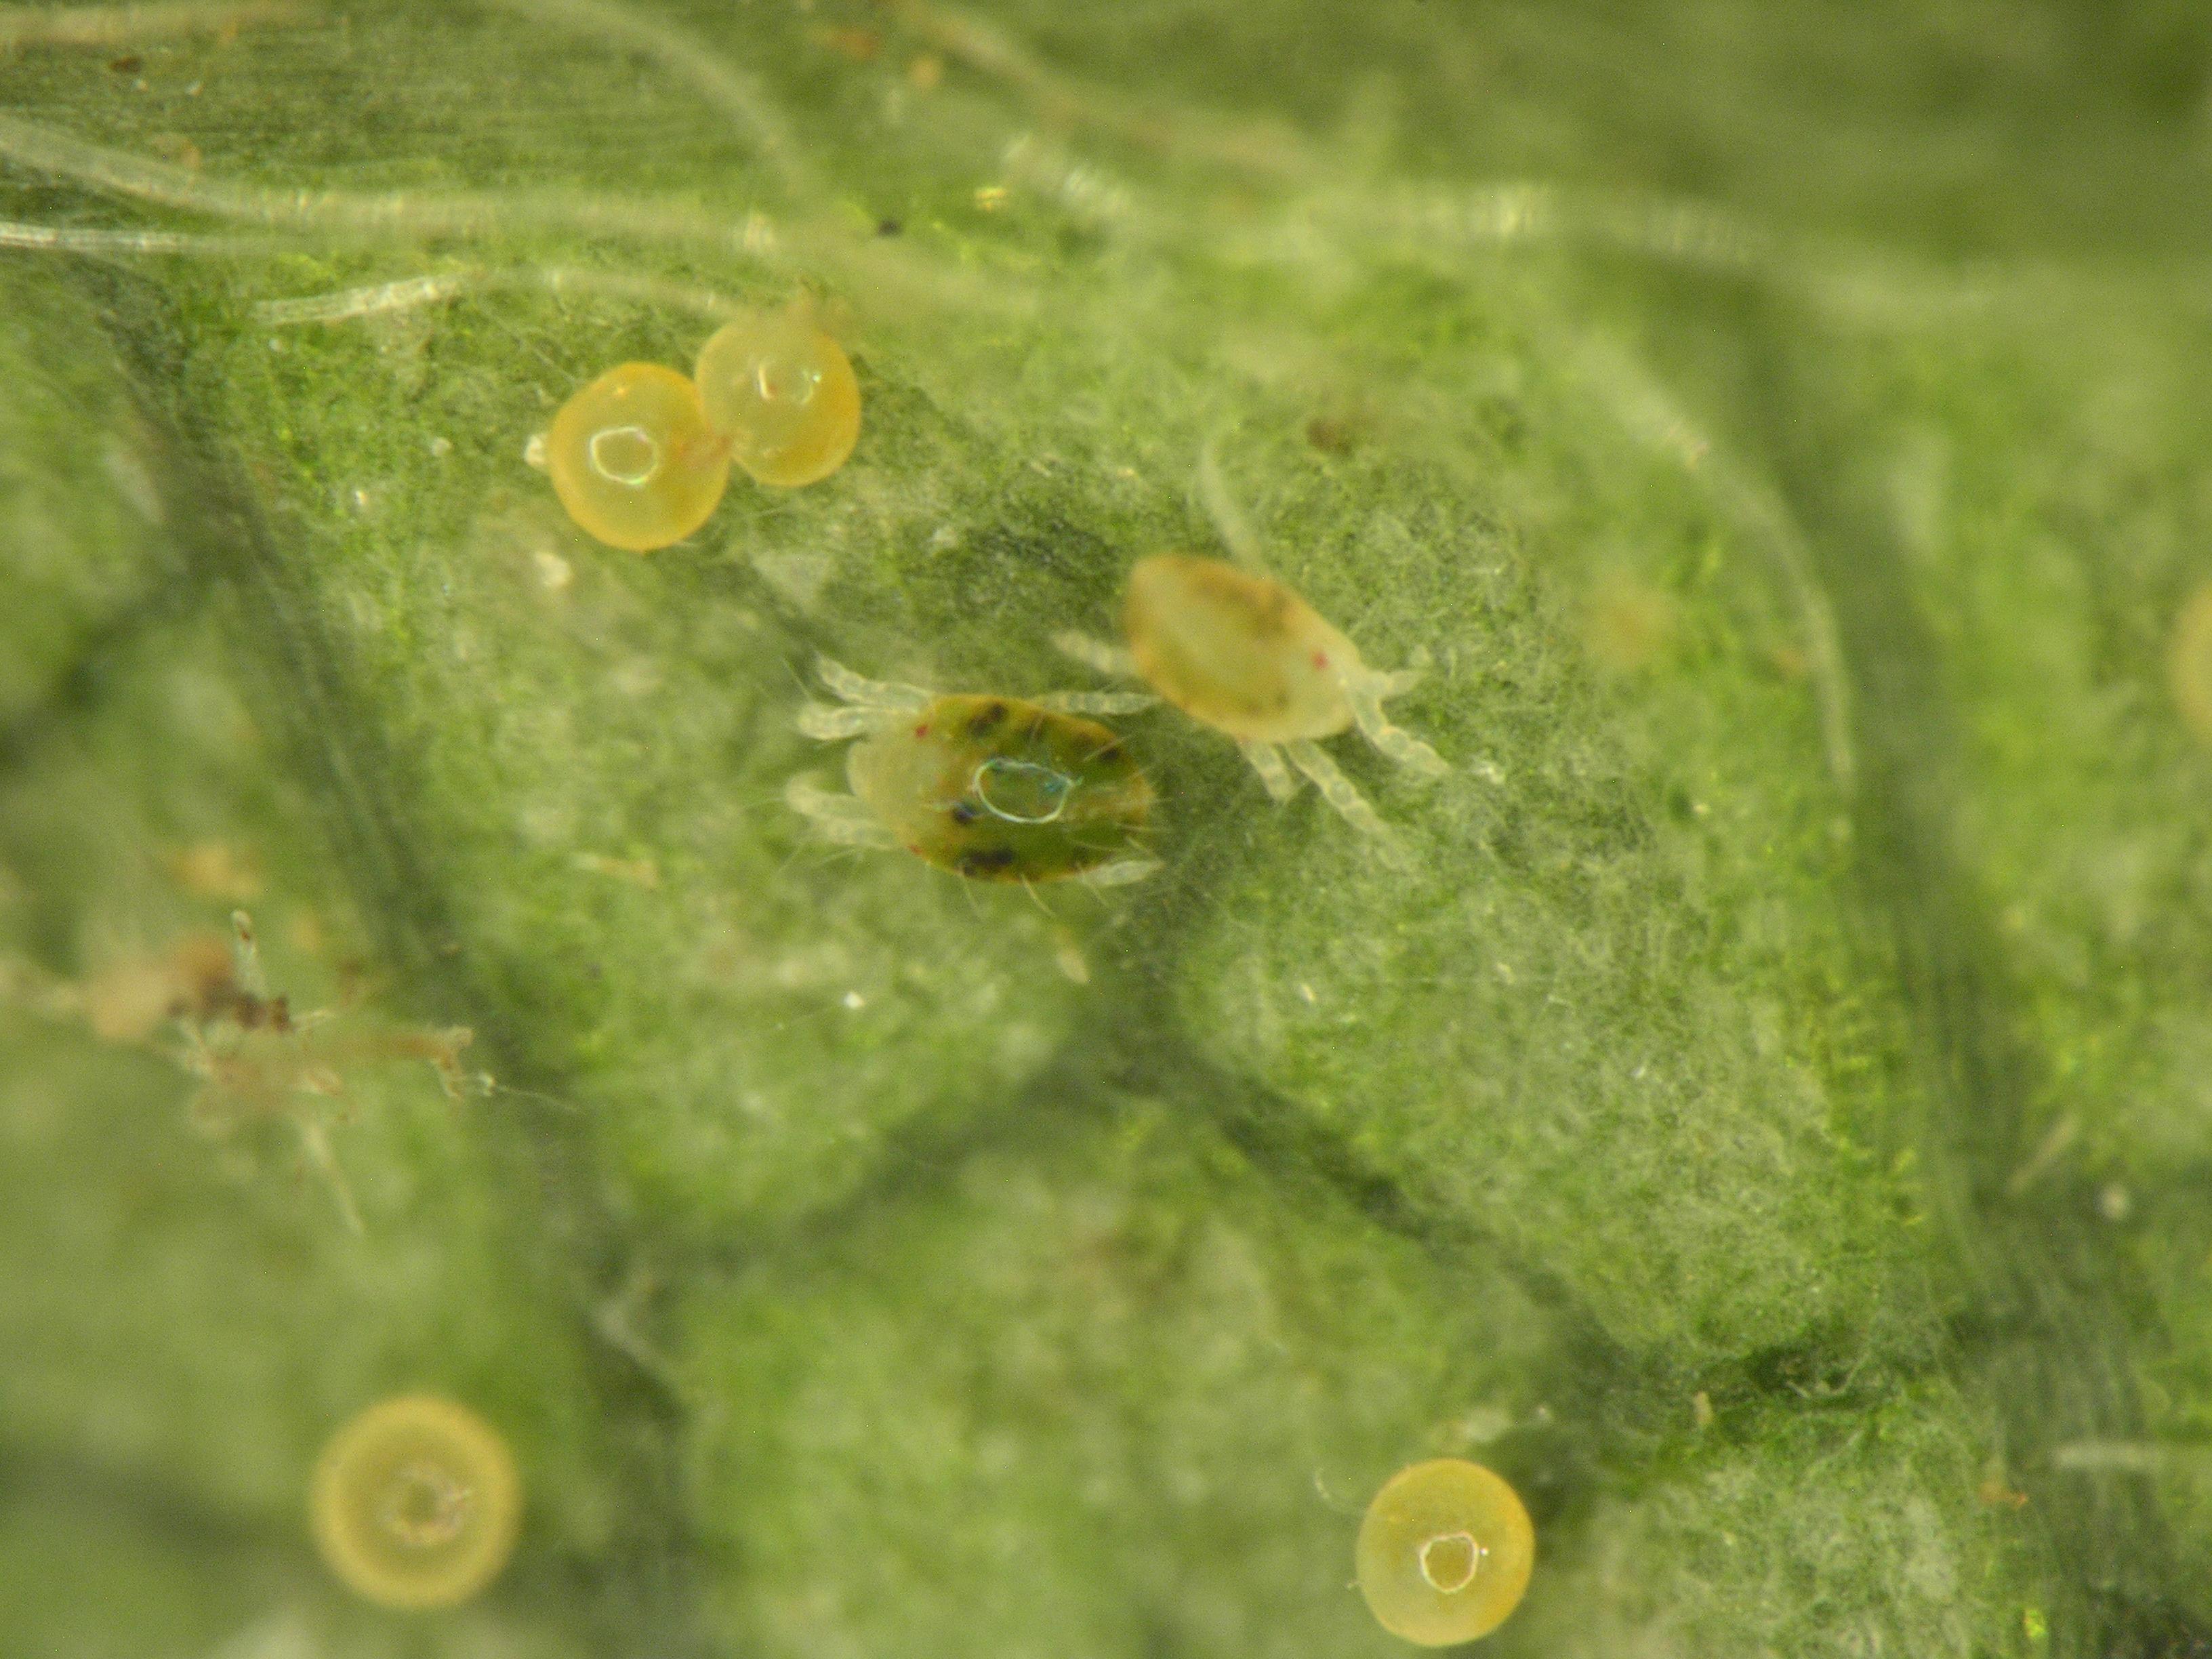 Two-spotted spider mite (Photo: Ric Bessin, UKY)